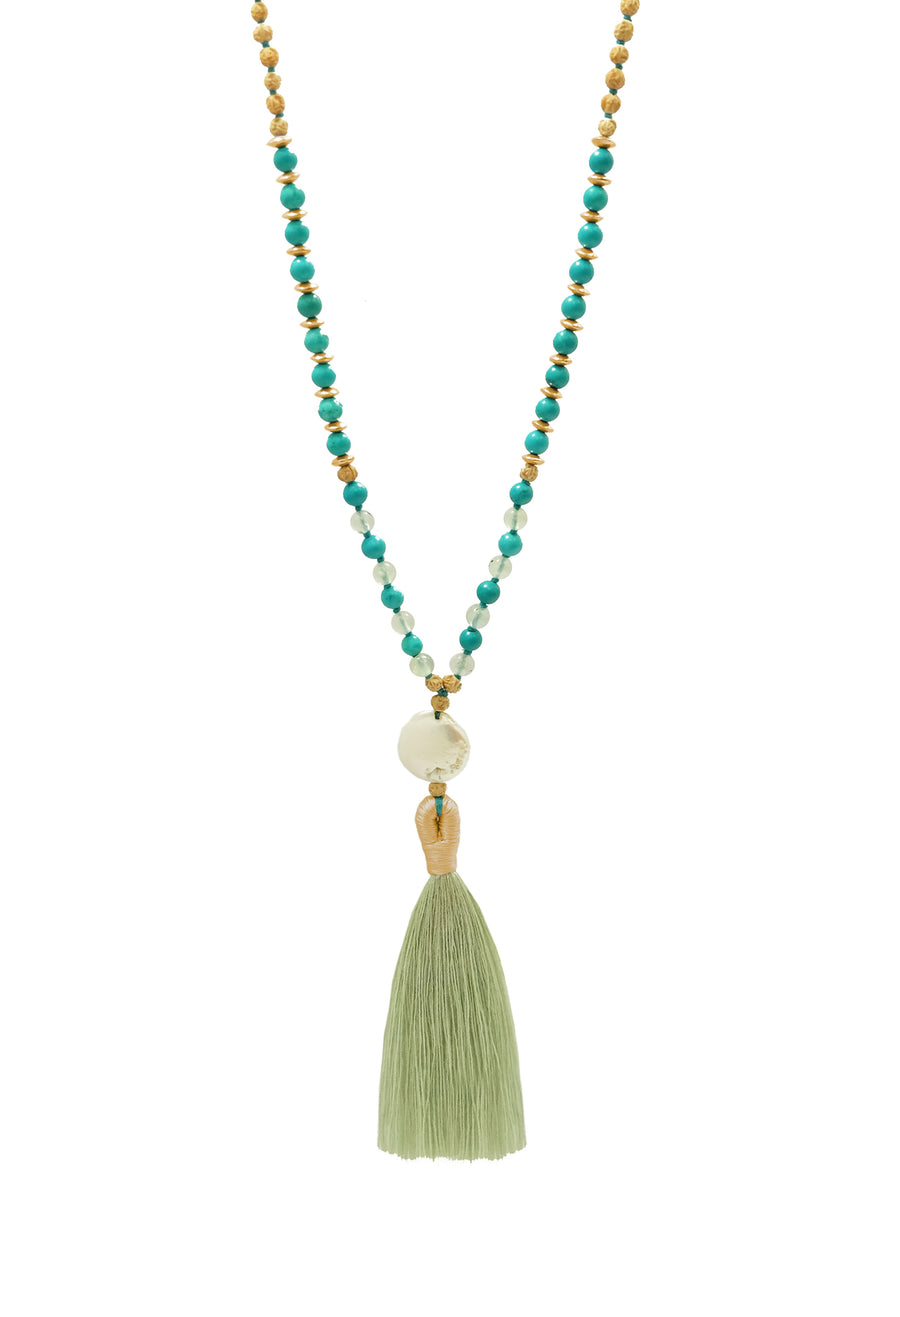 A captivating mala necklace named 'Lanikai Sunrise' with serene ocean-inspired colors. The mala features beautiful 4mm prehnite, turquoise gemstones, and rudrani seeds, complemented by elegant 22K gold accents. At its heart, a shimmering freshwater pearl pendant adds a touch of sophistication. Experience the bliss of floating weightless in heavenly waves under the tropical sun with this enchanting mala.